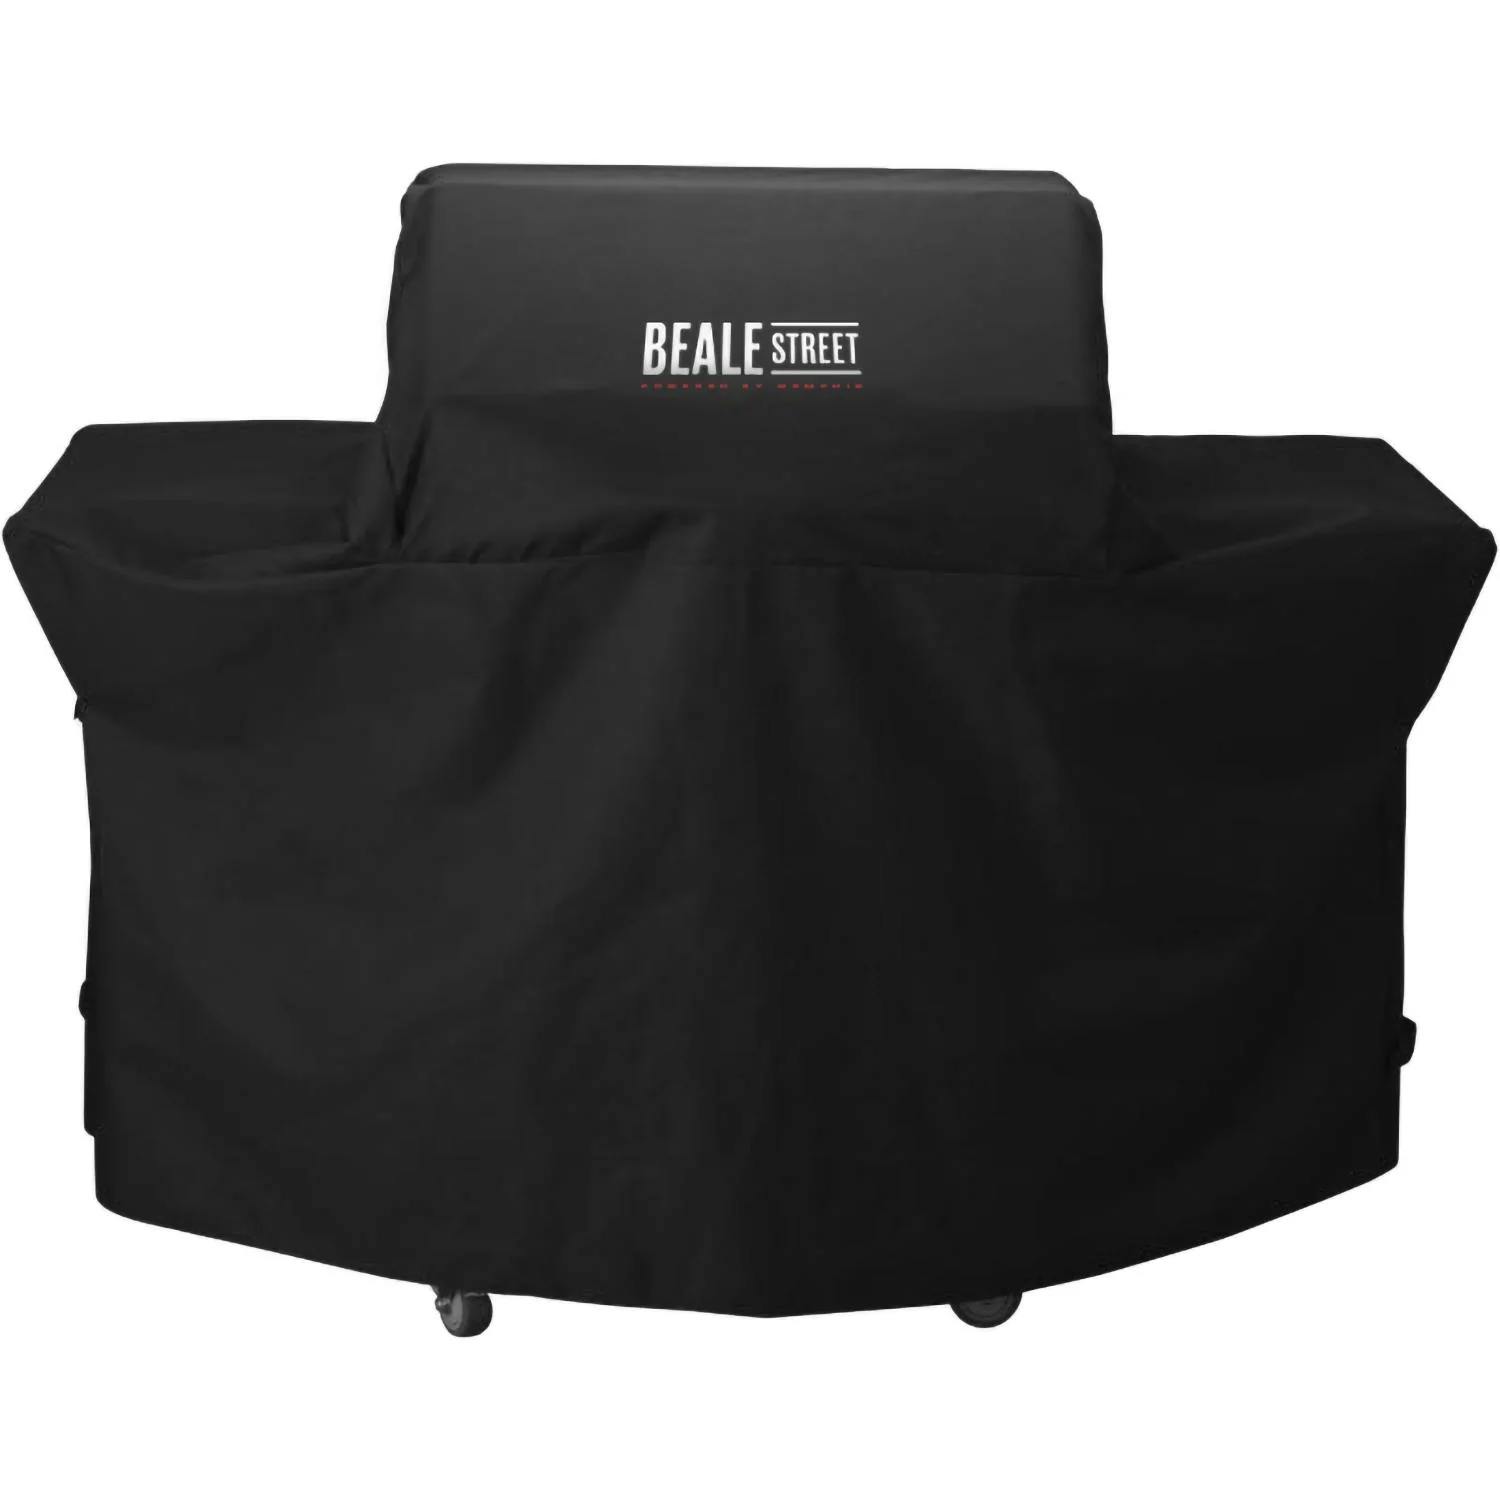 Memphis Grill Cover For Beale Street Built-In Wi-Fi Controlled Pellet Grill